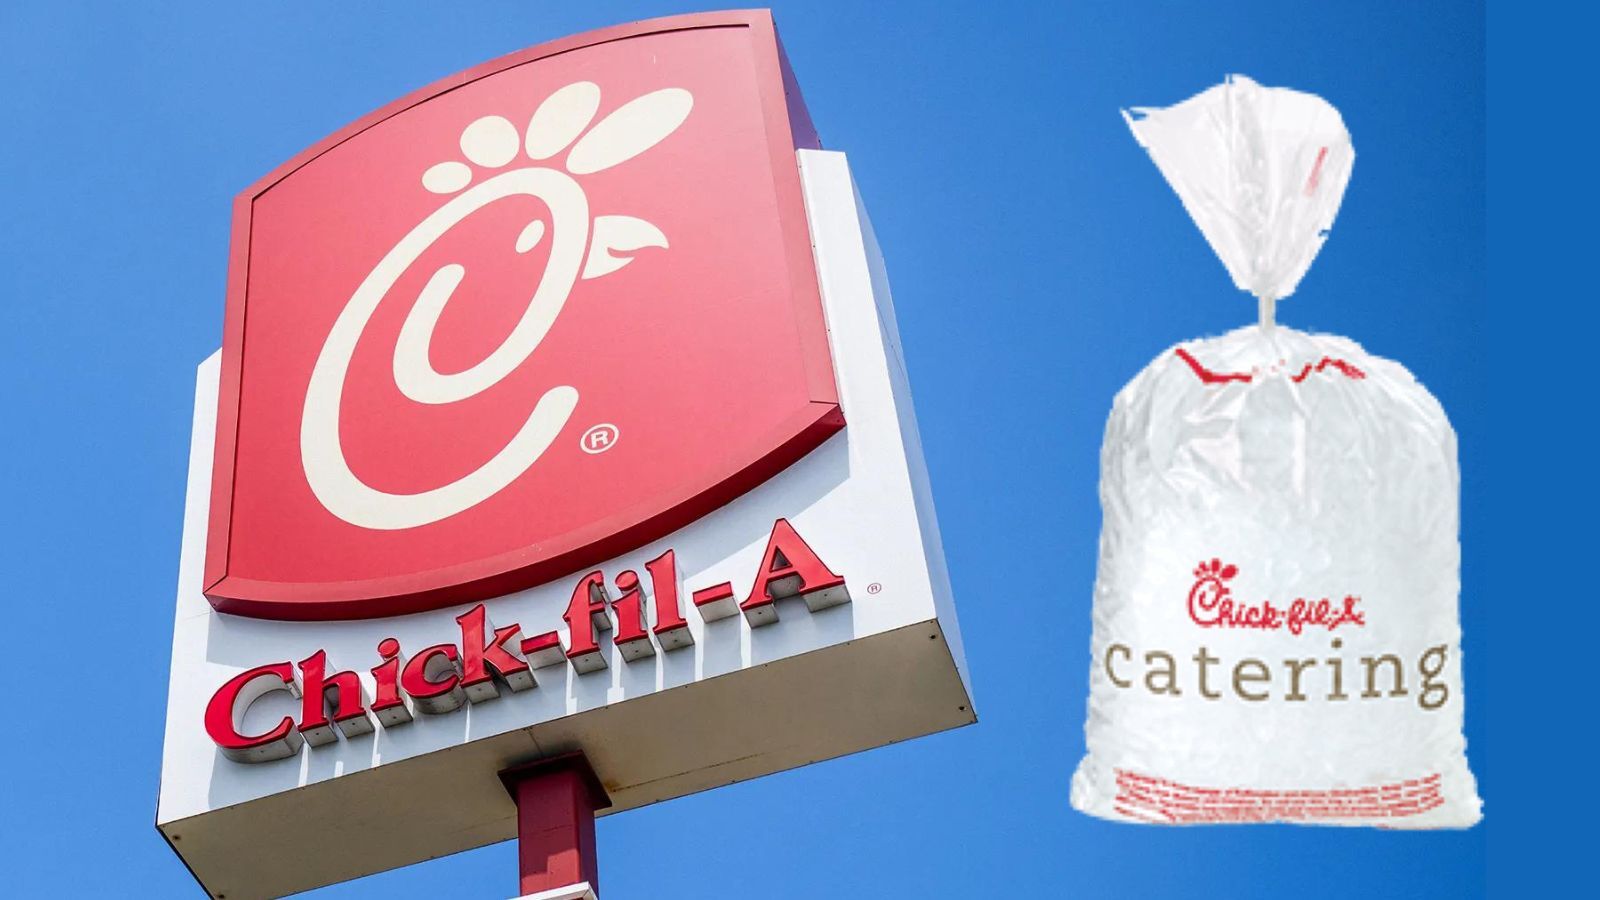 Does Chick-fil-A Sell Ice? (Source, Prices and More)